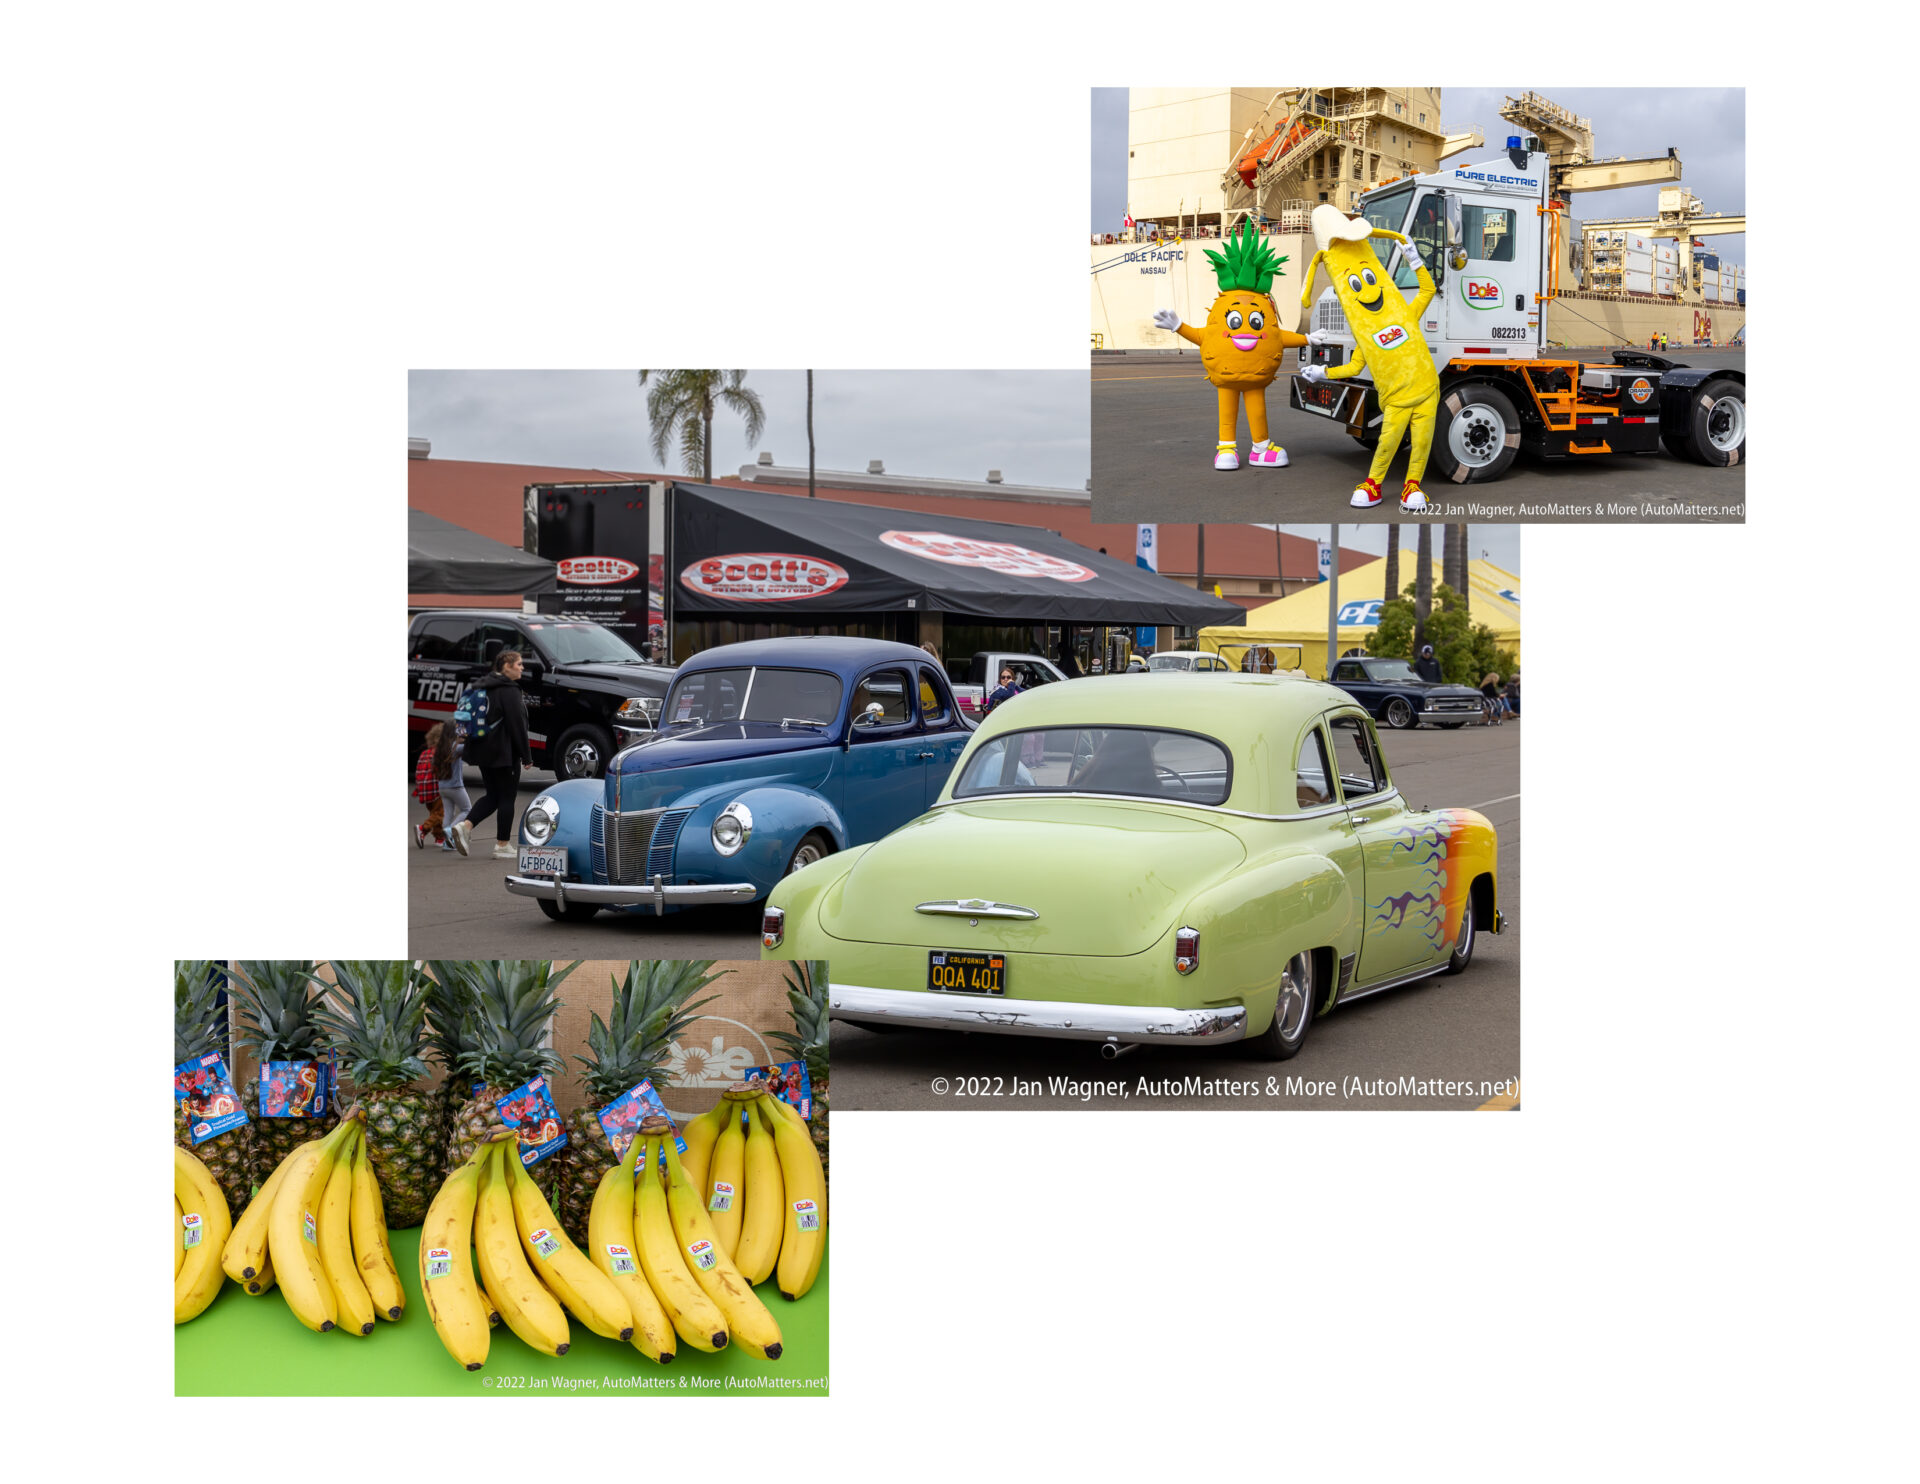 c-J-Wagner-20220415-Featured-Image-collage-Dole-Goodguys-cruise